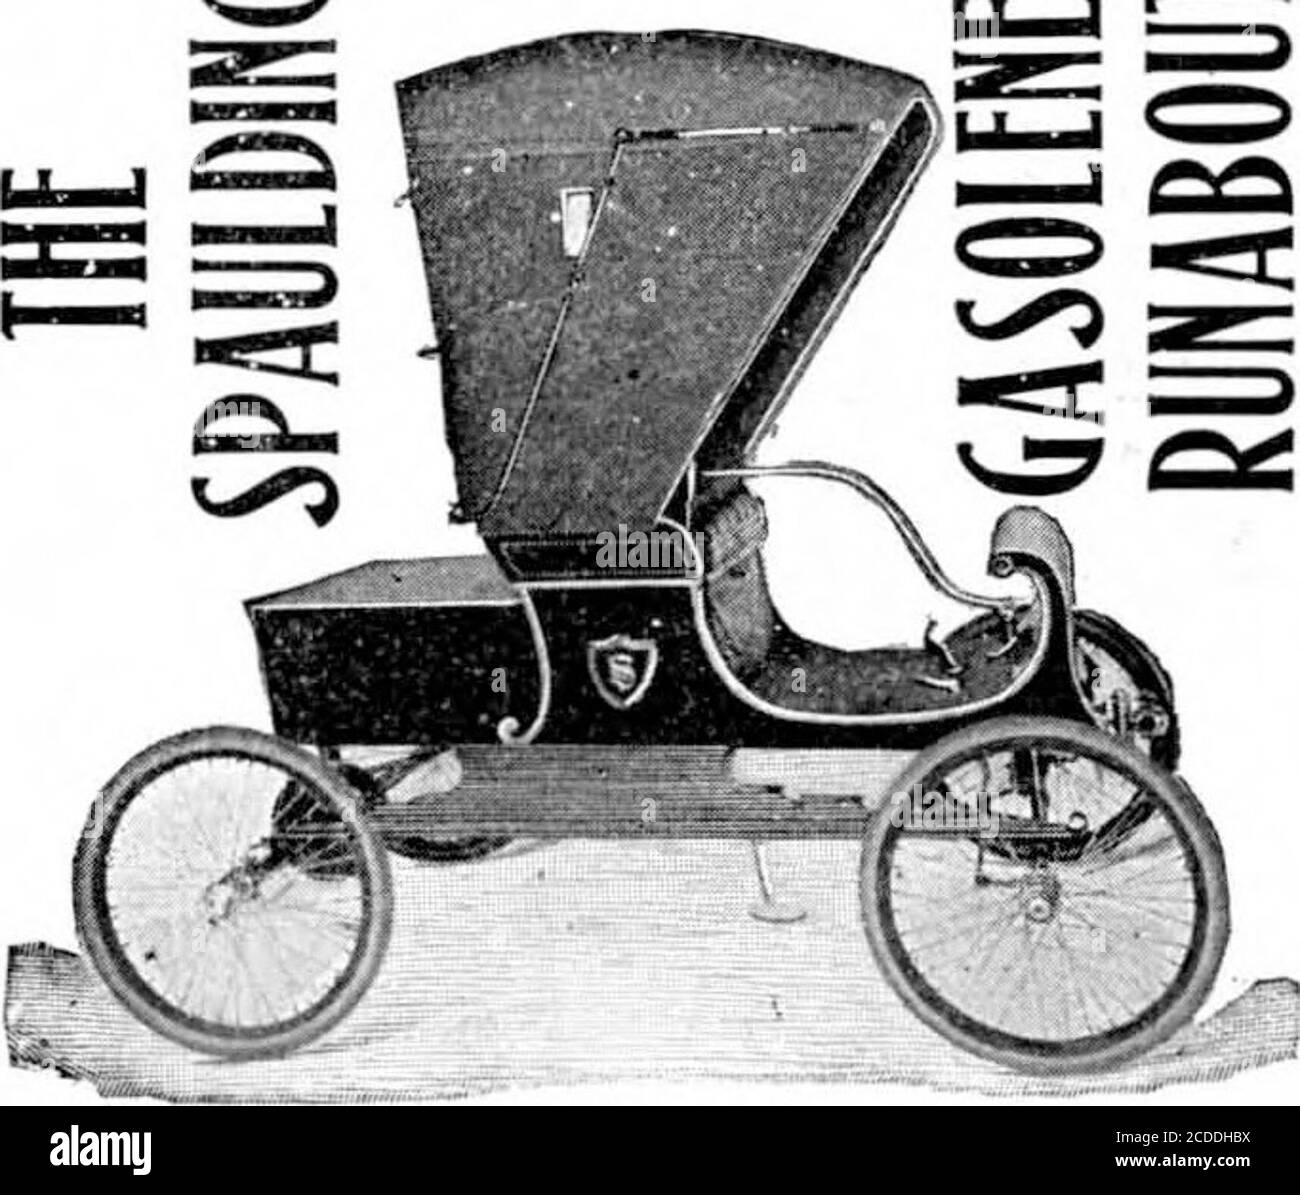 . Scientific American Volume 86 Number 14 (April 1902) . STRENGTH,FINISH Ease of Handling, Reliabilityand Running Qualities. Impos-sible to tell all abouttbera here.Write us for catalogue. In-quiries cheerfully an-swered. Desirableagents wanted. THE CONRADMOTOR CARRIAGECOMPANY, 1417 Niagara St., BUFFALO, N. Y. FI8K TIRES FOK AUTOMOBILESBICYCLES aj.bCARRIAGES FISK RUBBER COMPANY, CHICOPEE FALLS, MASS. Write for information. ^». PRICE $700. Light, strong, safe and durable, above all easy to ope-rate. Has no complicated devices. About everythingimaginable has been said in commendation of its styl Stock Photo